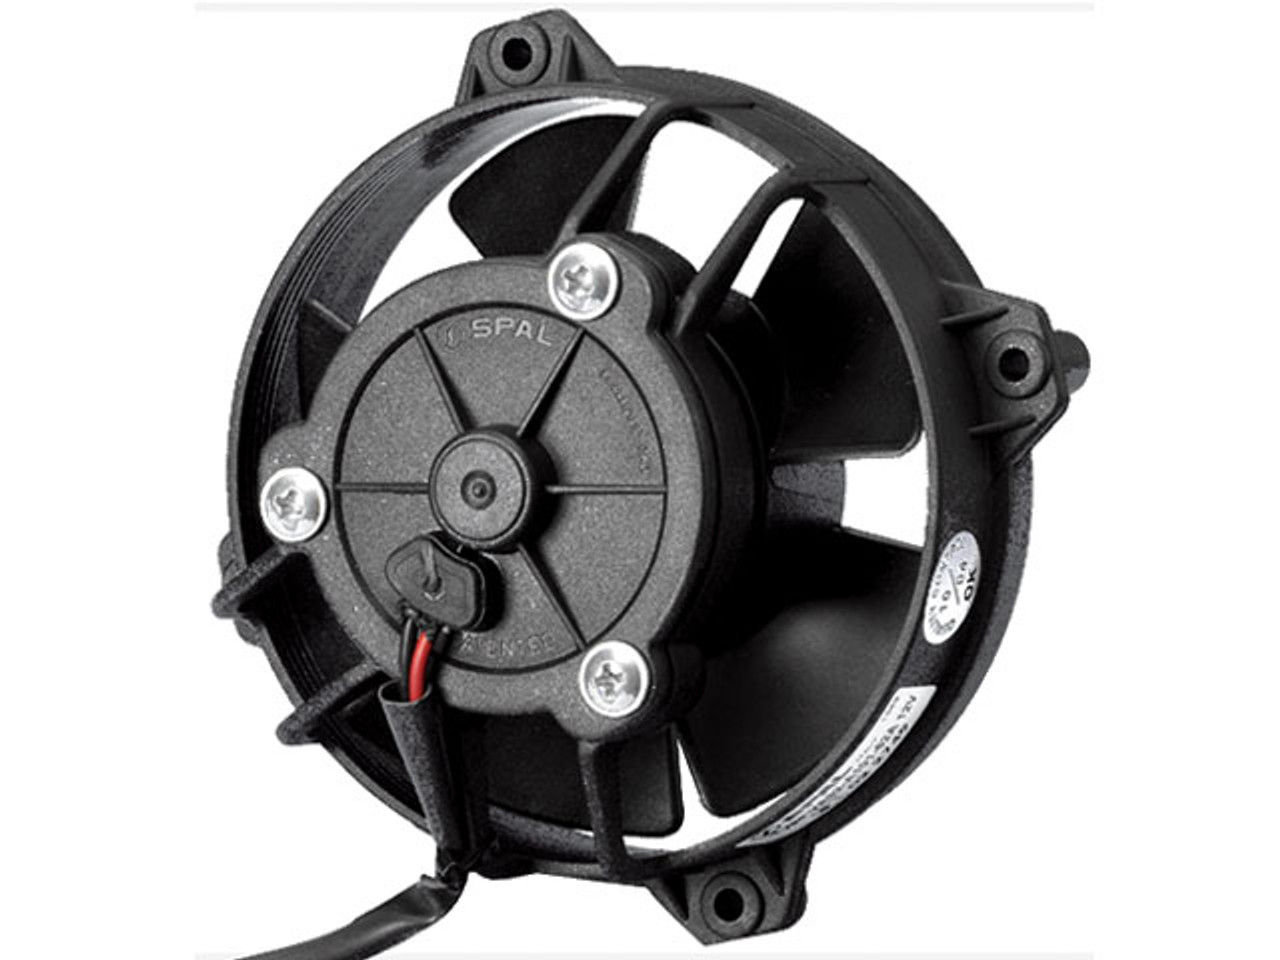 Spal 4in Pusher Fan Paddle Blade 147 CFM - SPA30103009